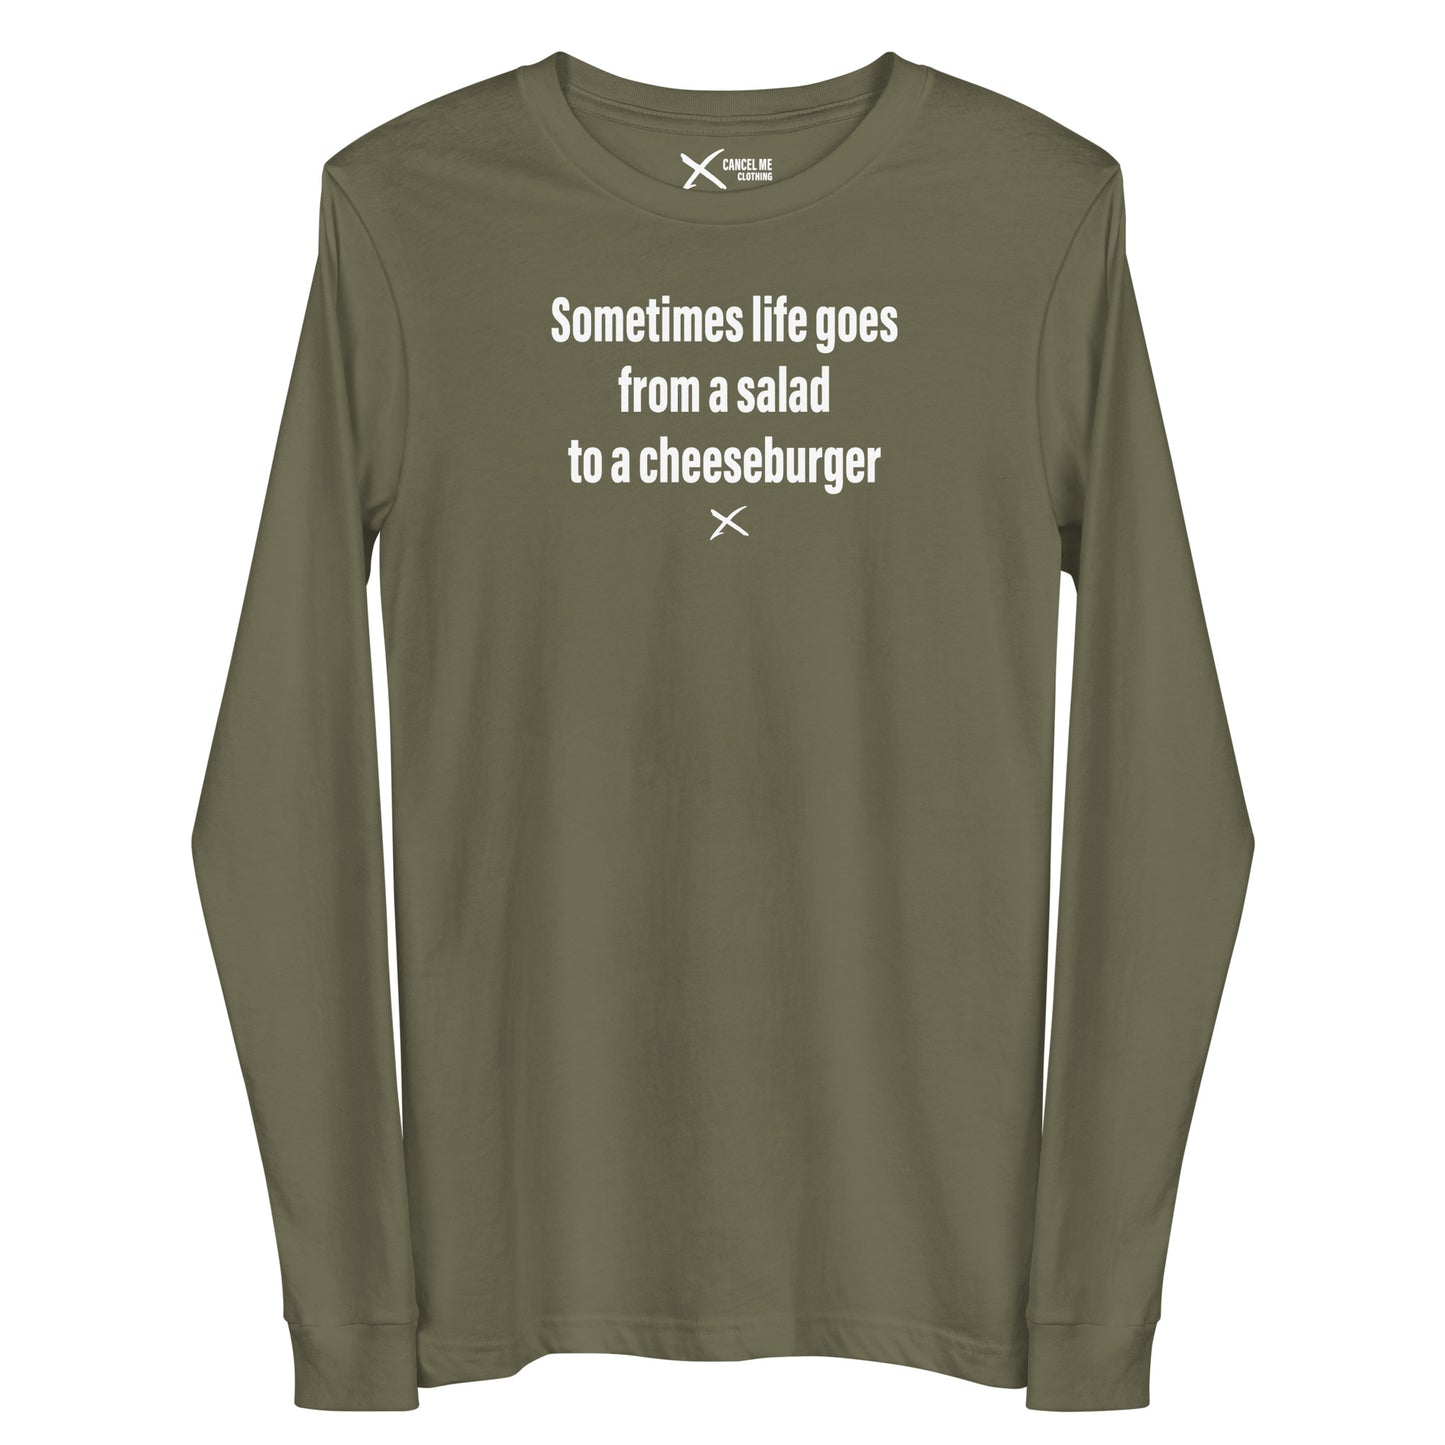 Sometimes life goes from a salad to a cheeseburger - Longsleeve